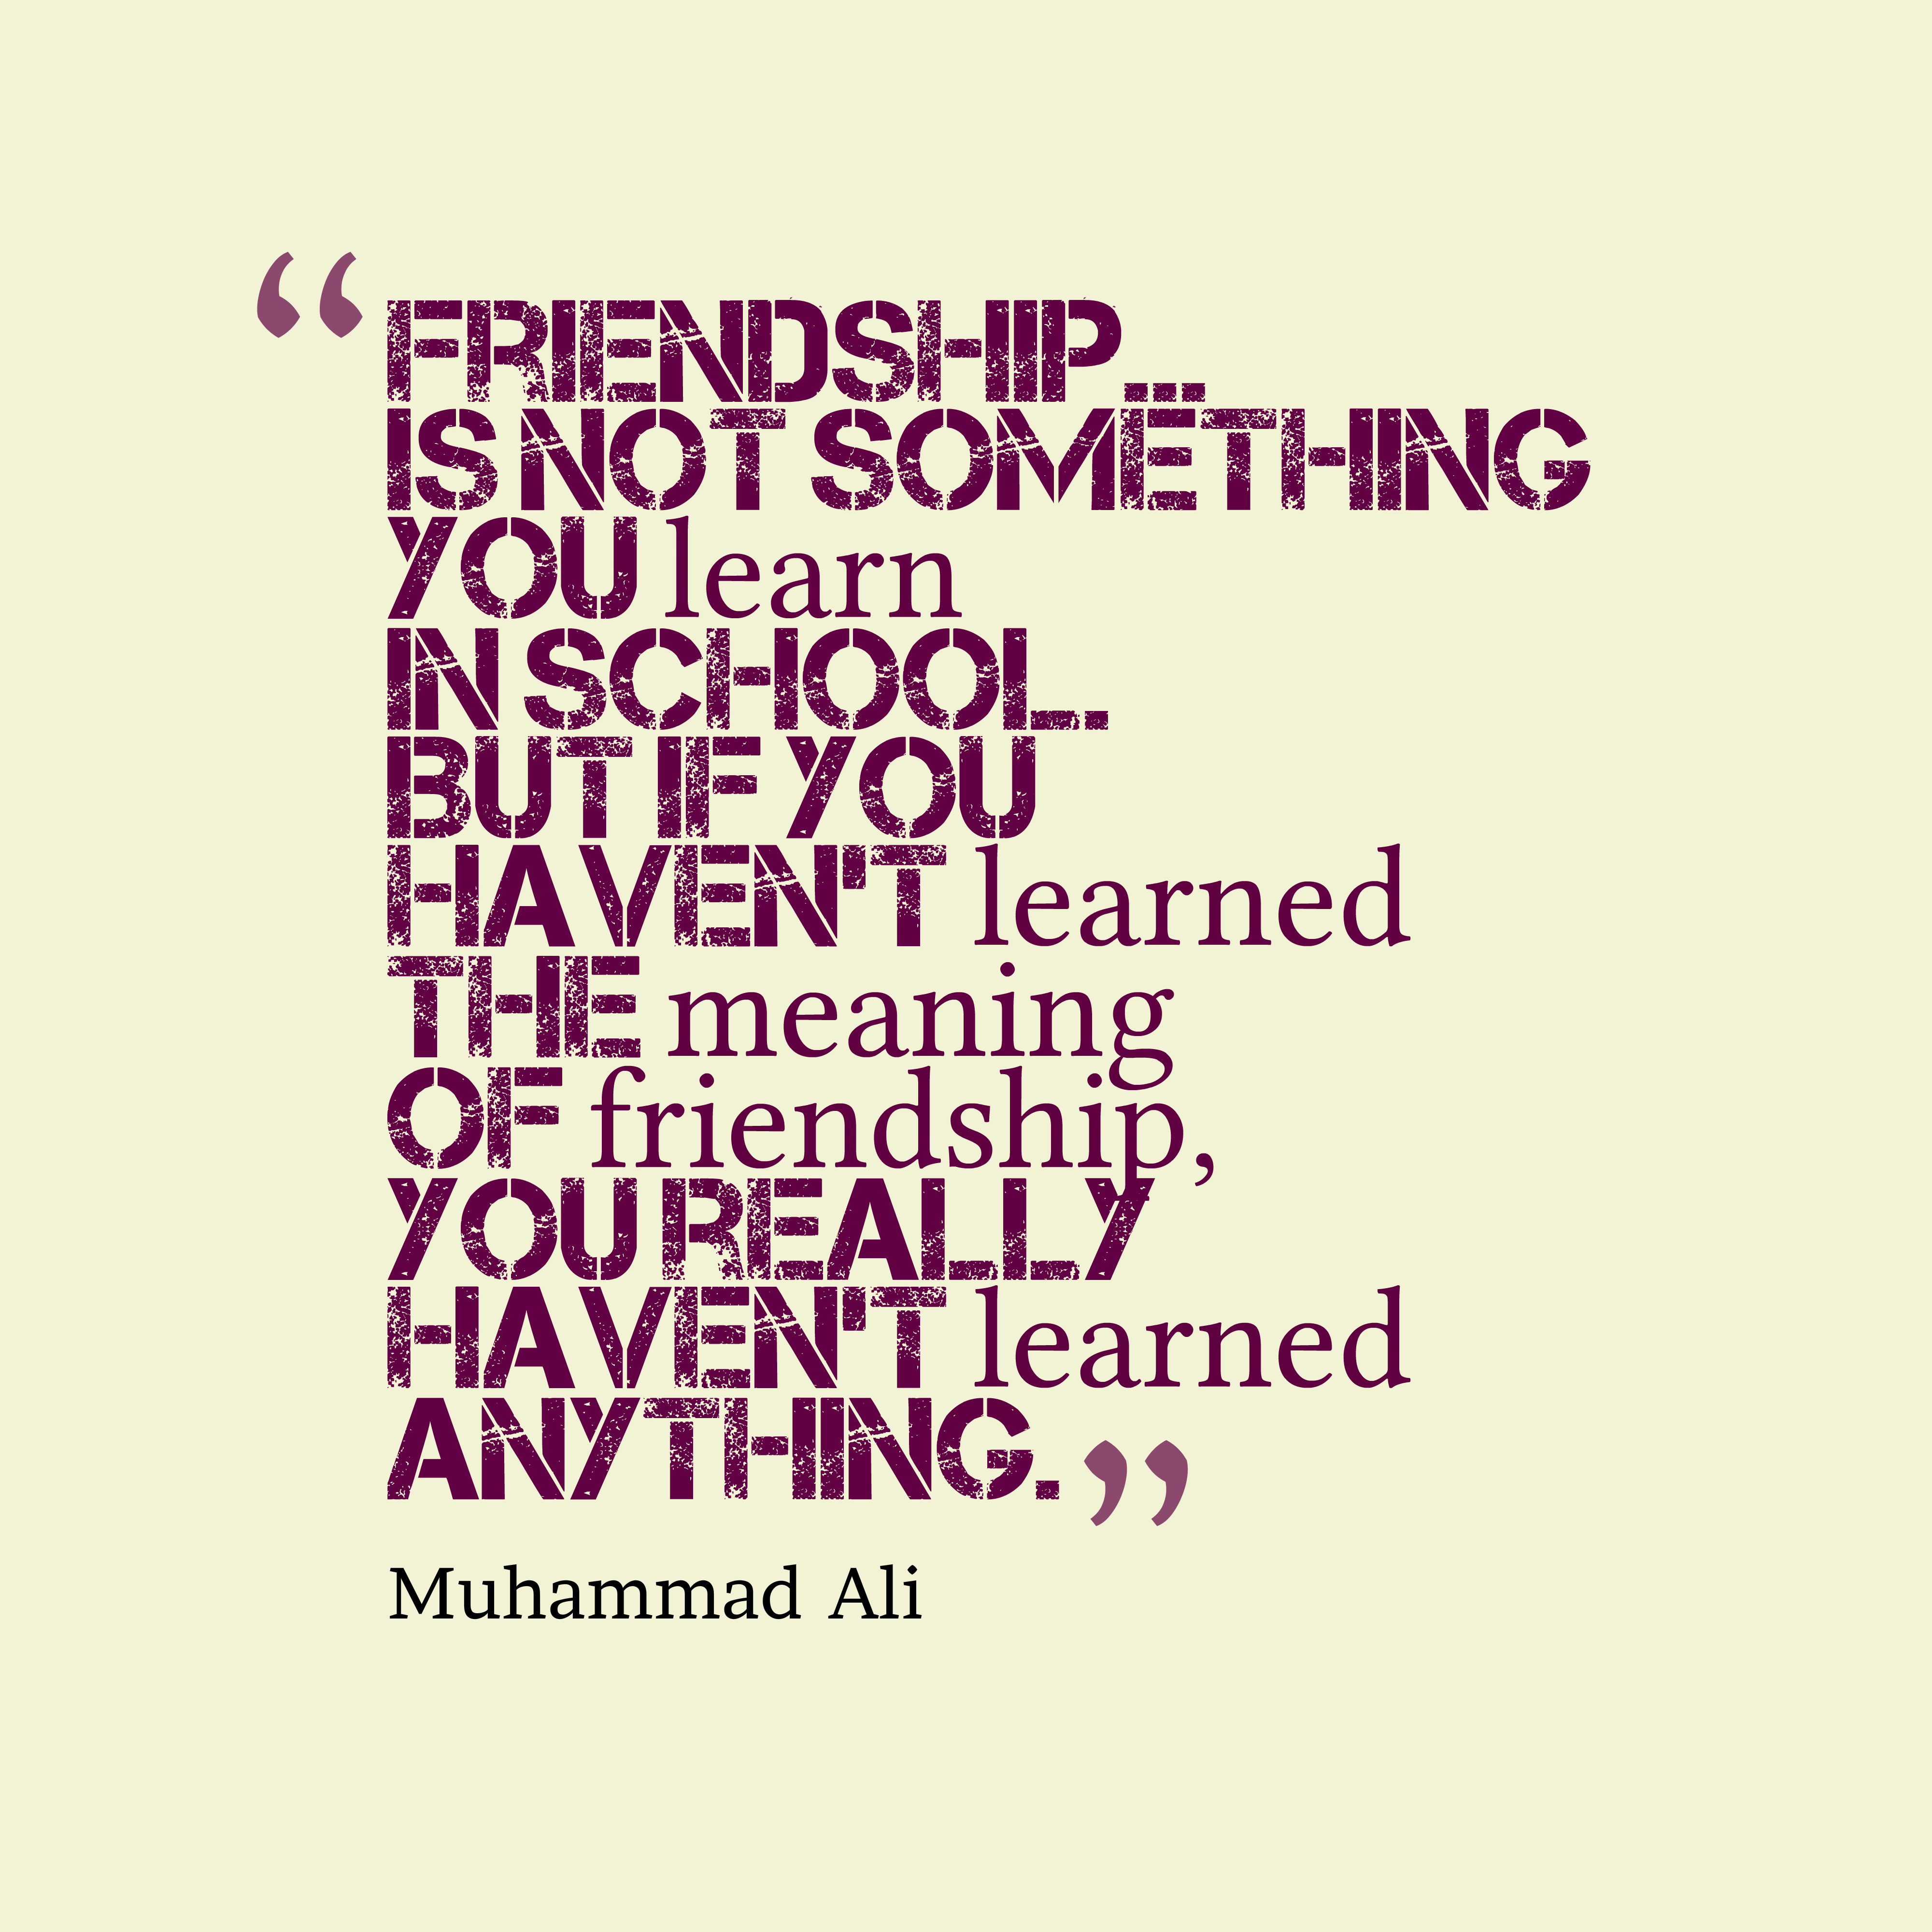 Best Friend Quotes Wallpapers - Wallpaper Cave